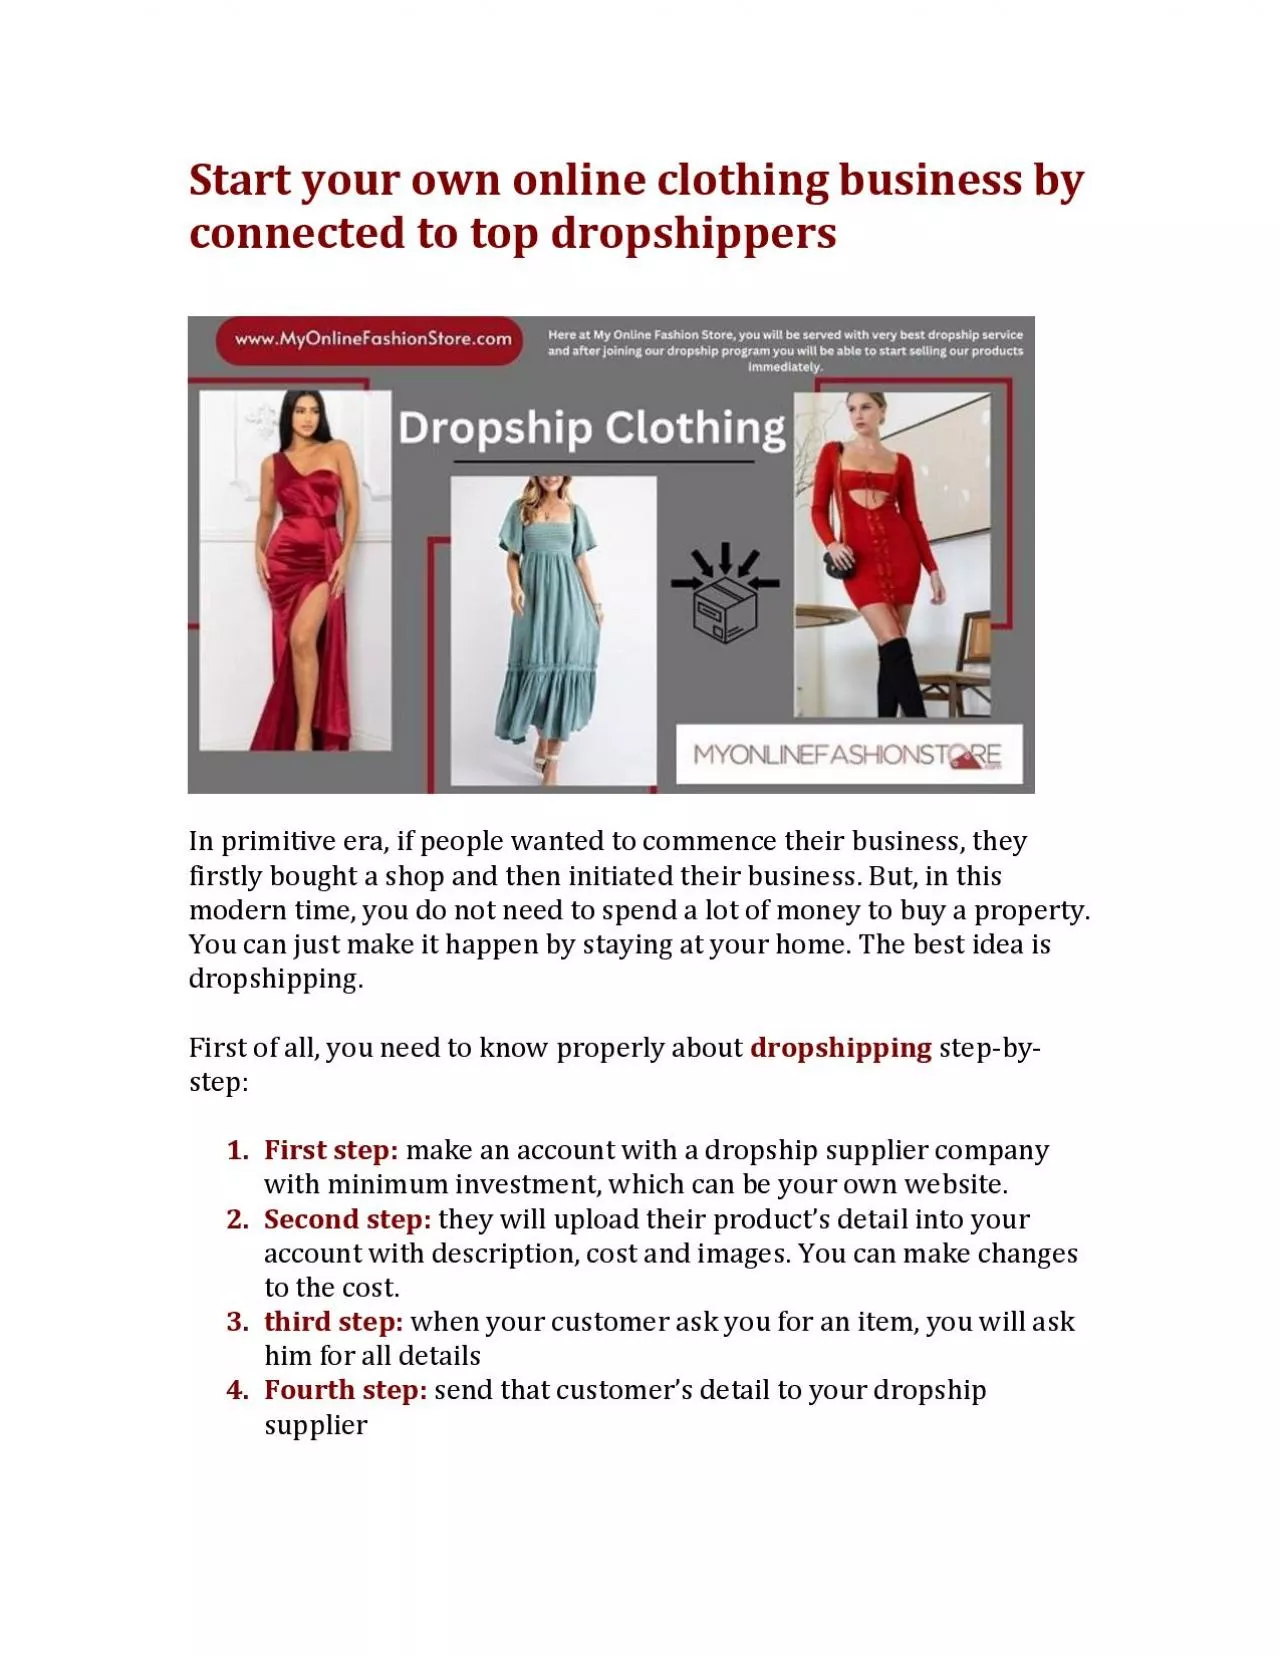 Start your own online clothing business by connected to top dropshippers